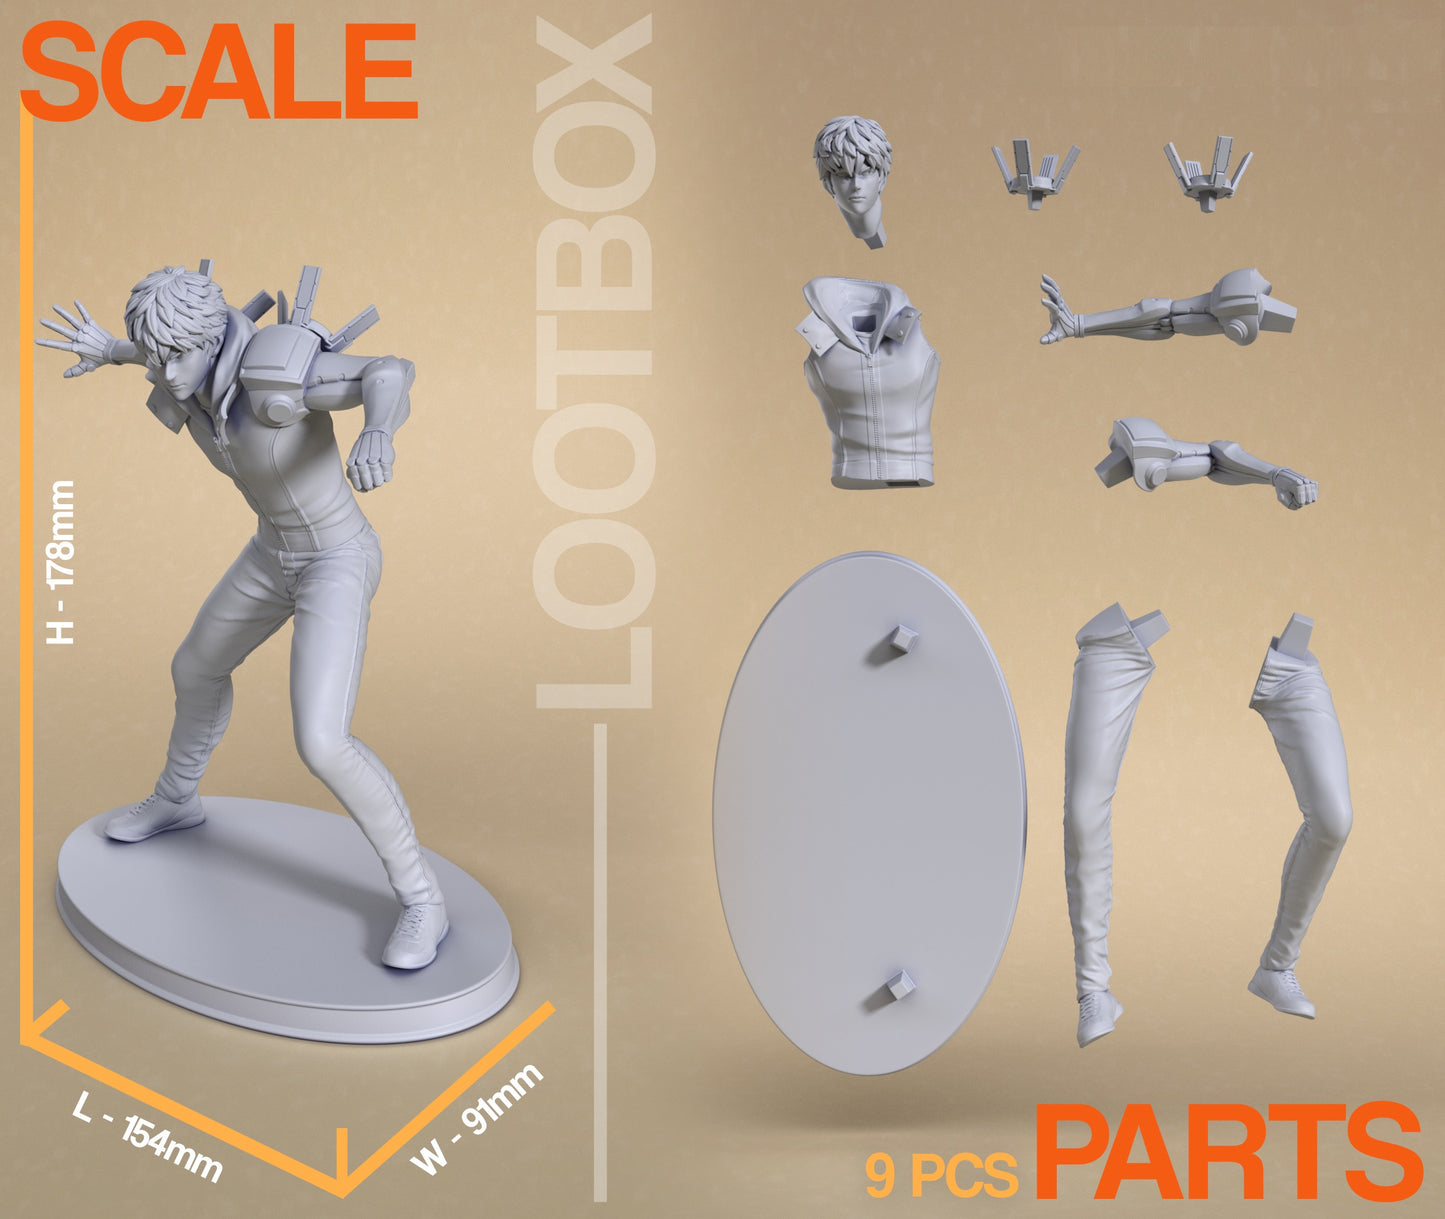 One Punch Man STL File 3D Printing Design Anime Character Genos STL File 0141